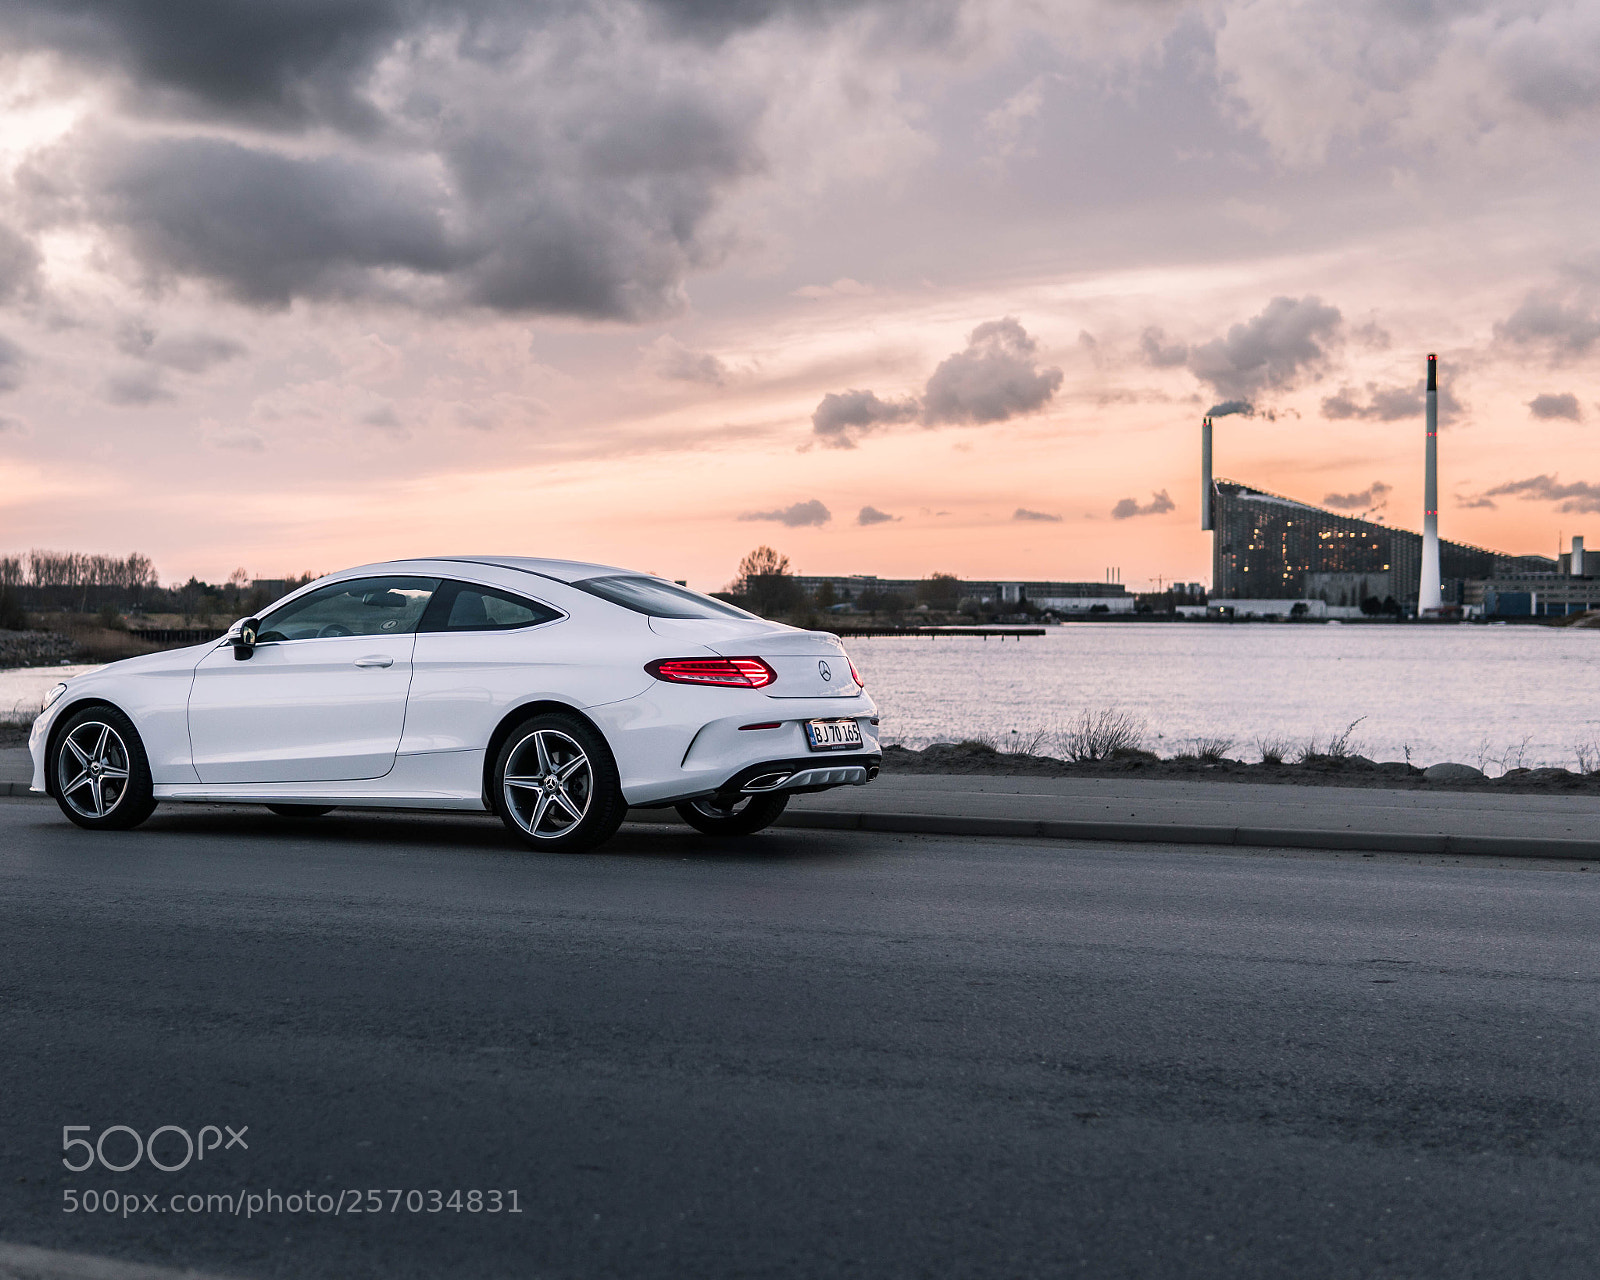 Sony a6300 sample photo. Mercedes-benz c200 coupe amg photography